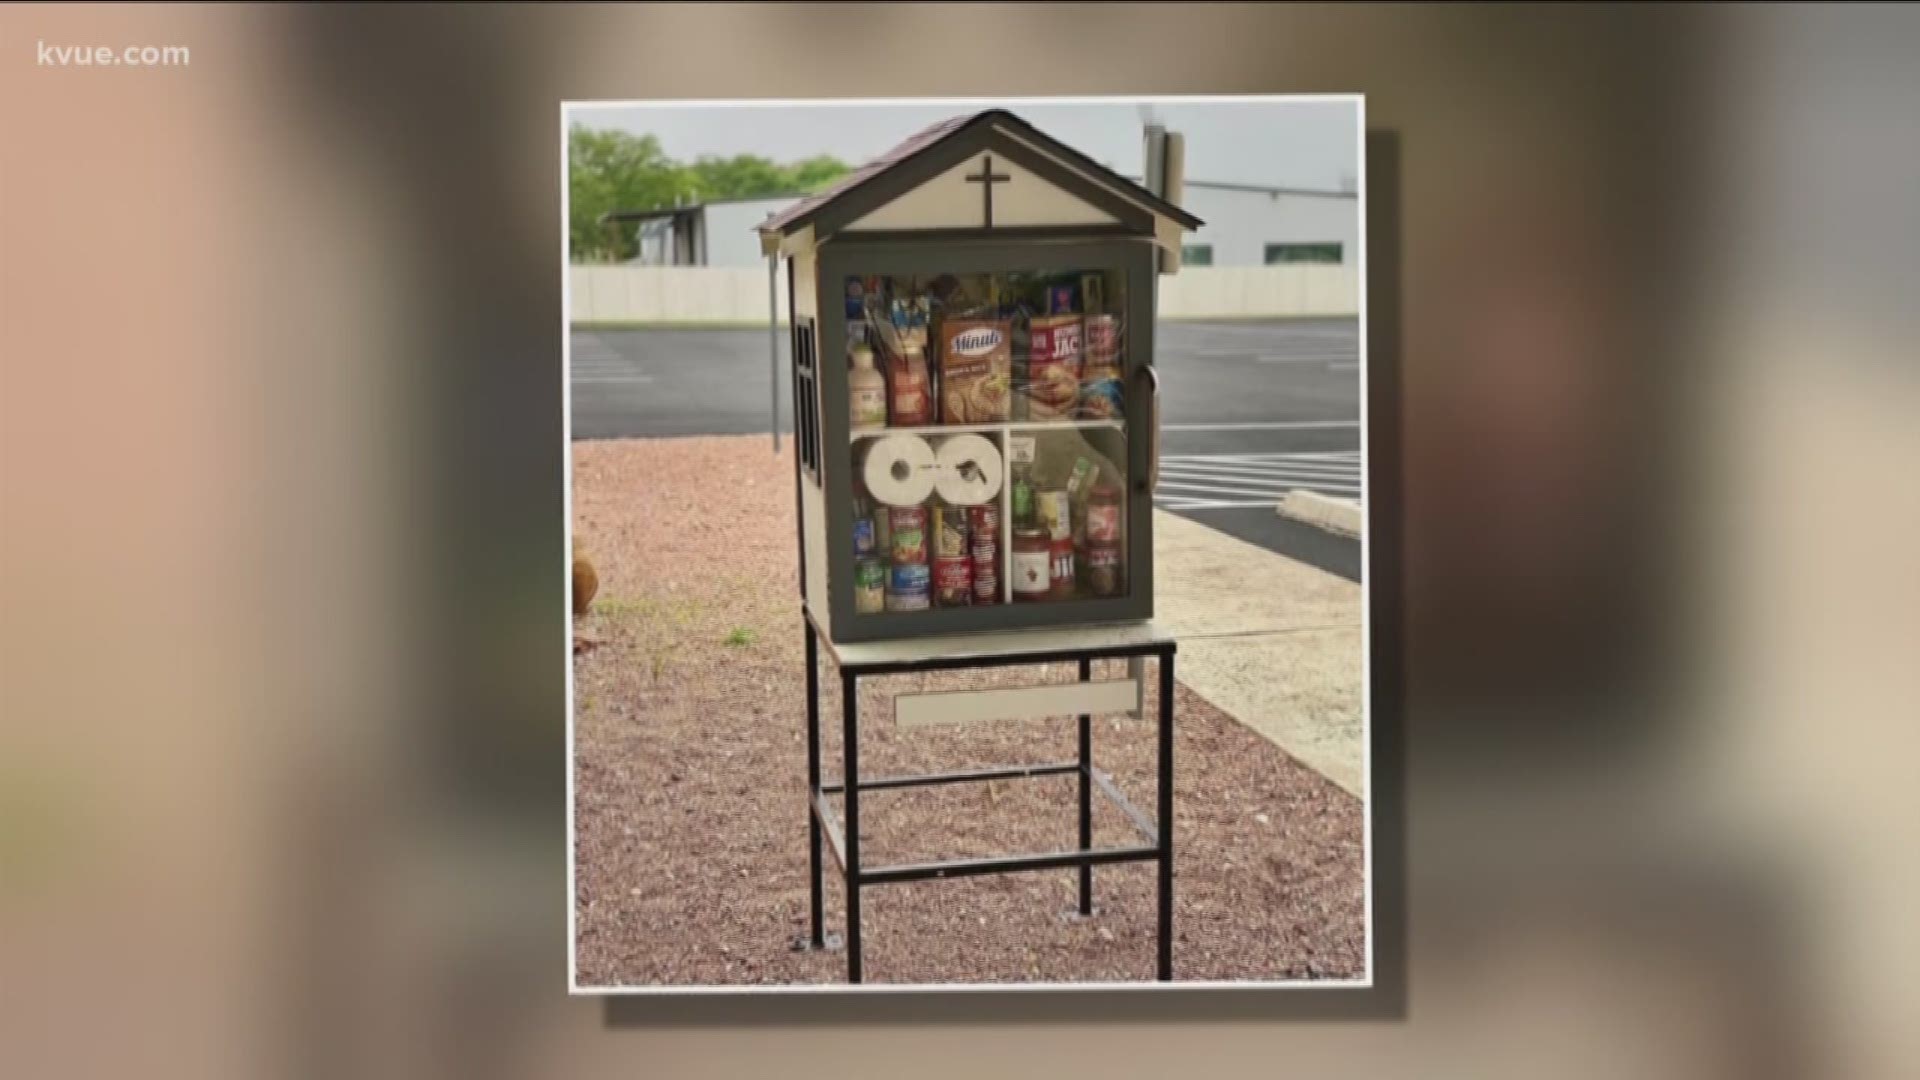 A pastor found a safe way to spread his kindness in the neighborhood.